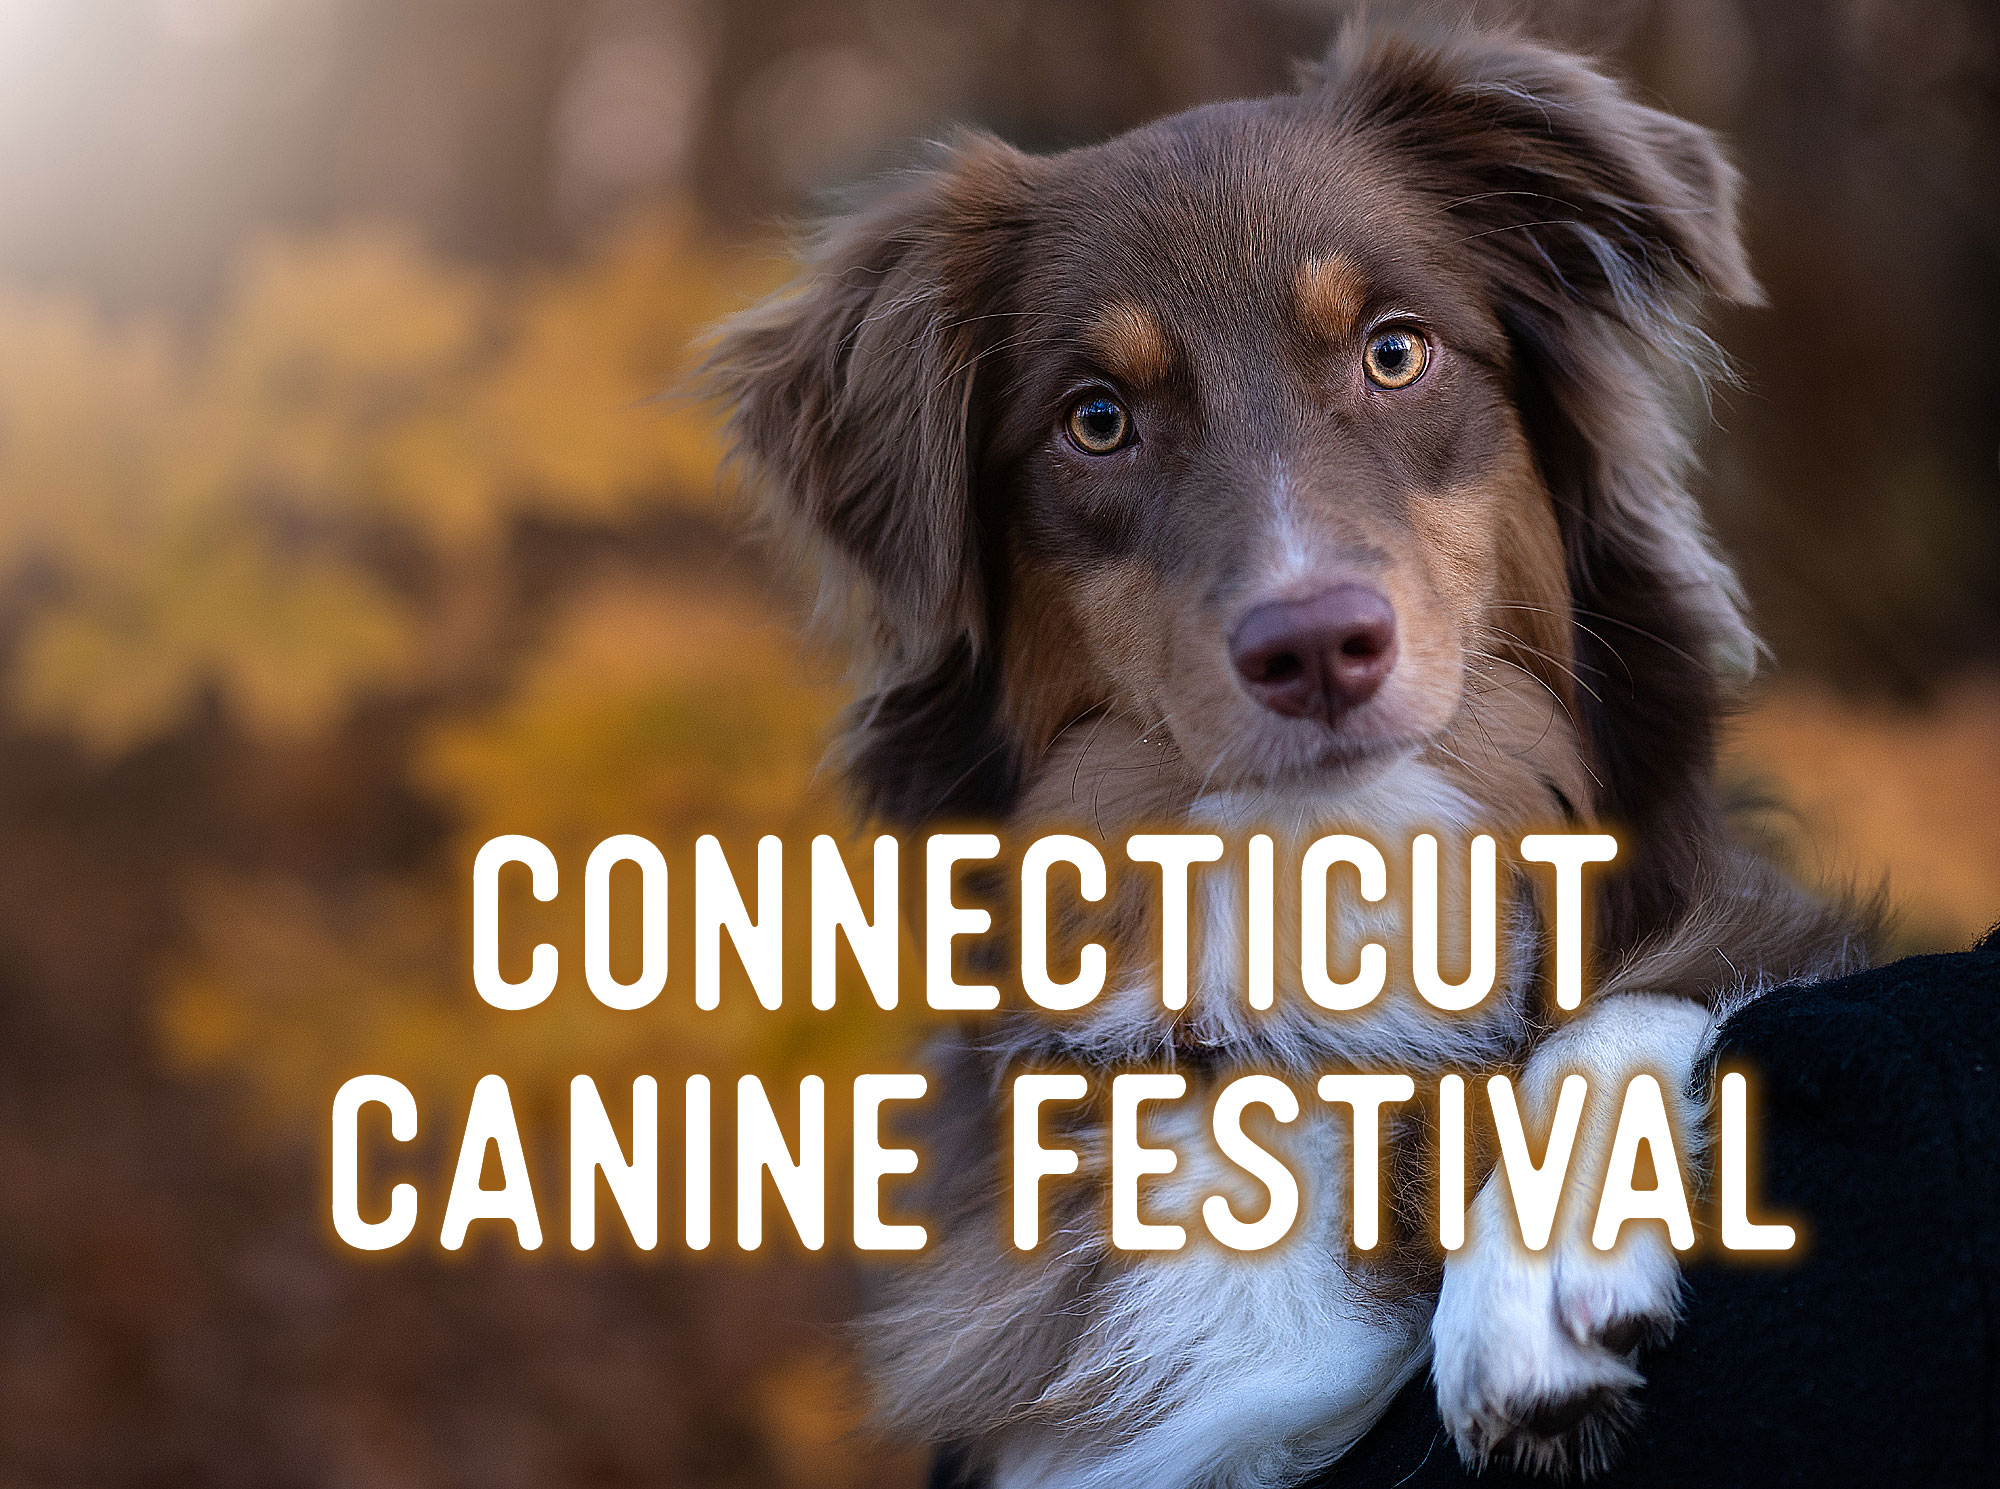 Connecticut Canine Festival at Priam Vineyards